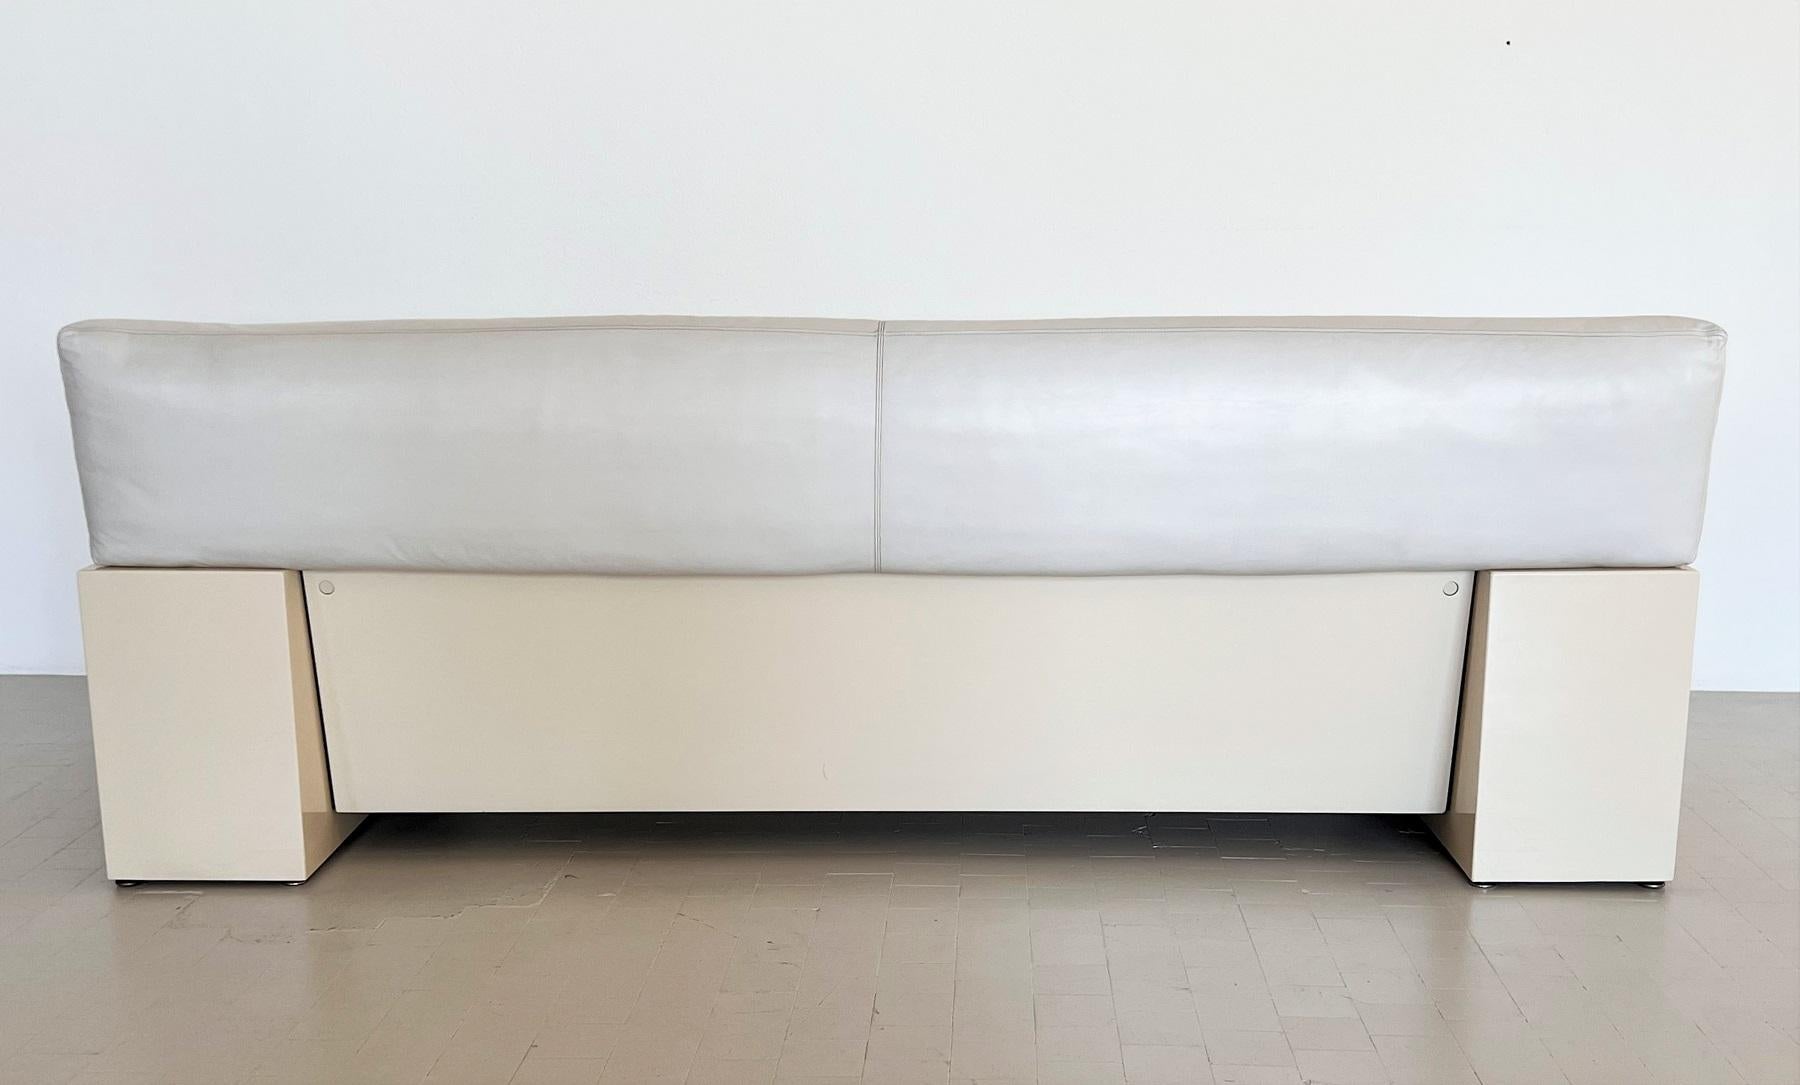 Cini Boeri for Knoll, three seater sofa, model 'Brigadier', leather, lacquered wood, Italy, designed in 1976.

Architectural minimalistic sofa model 'Brigadier' designed by Italian designer Cini Boeri for Knoll in 1976. This is the version with